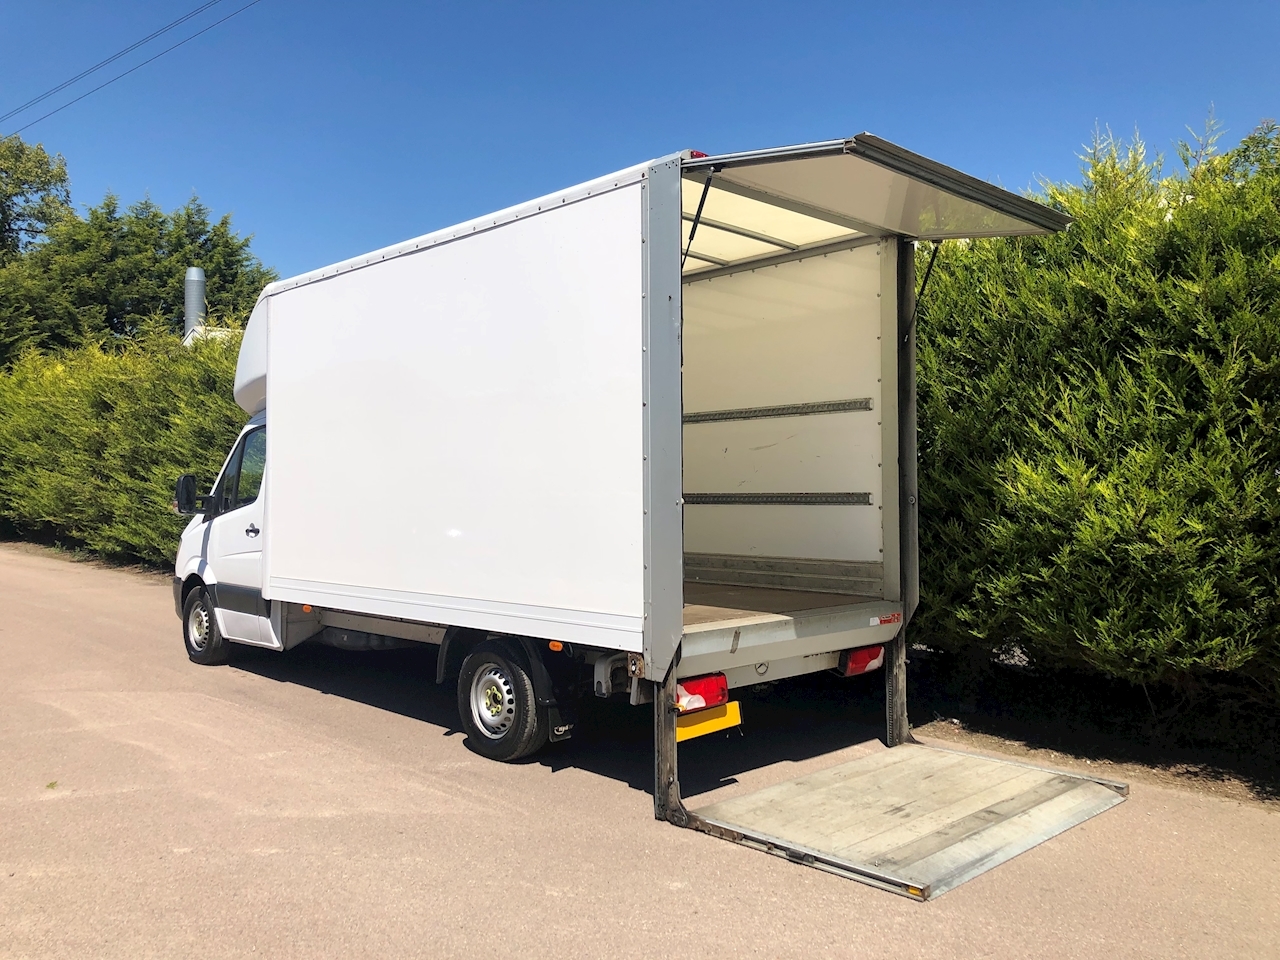 luton van with tail lift for sale online